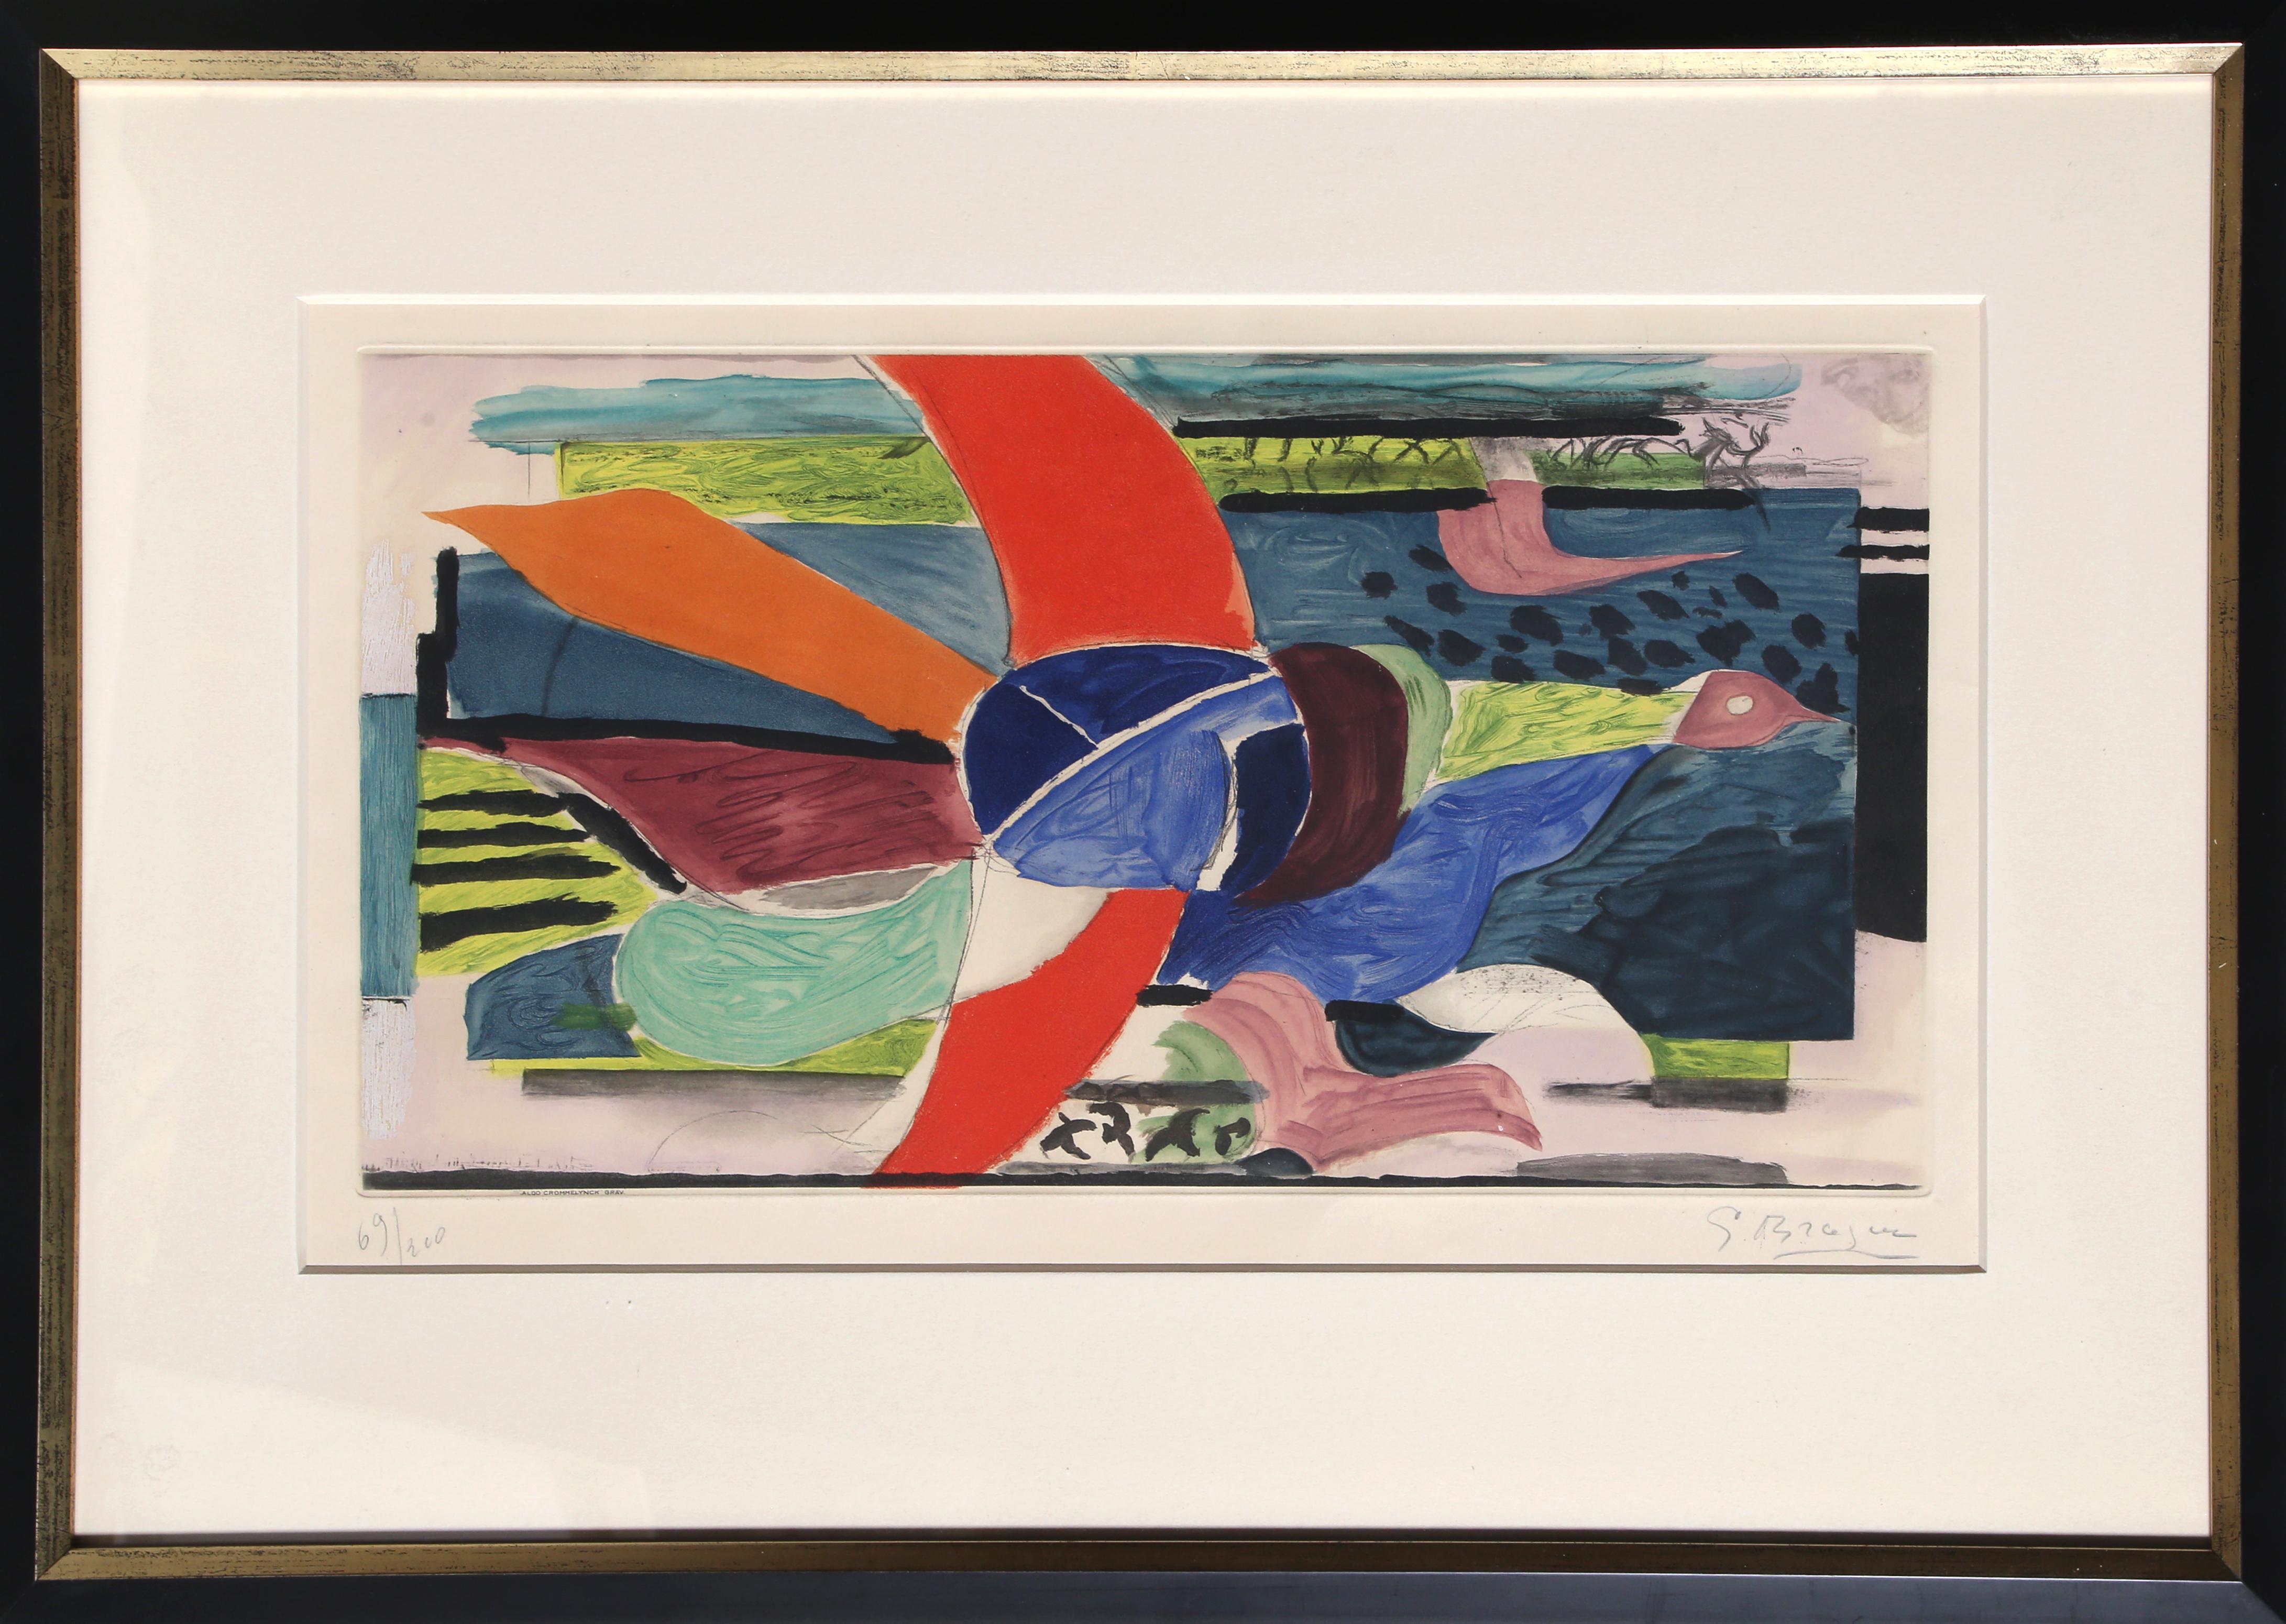 Oiseau Multicolore by Georges Braque, French (1882–1963)
Date: 1950
Aquatint Etching, signed and numbered in pencil
Edition of 69/200
Image Size: 10 x 19.5 inches
Size: 17.75 x 25.25 in. (45.09 x 64.14 cm)
Frame Size: 19.5 x 28 inches
Printer: Aldo